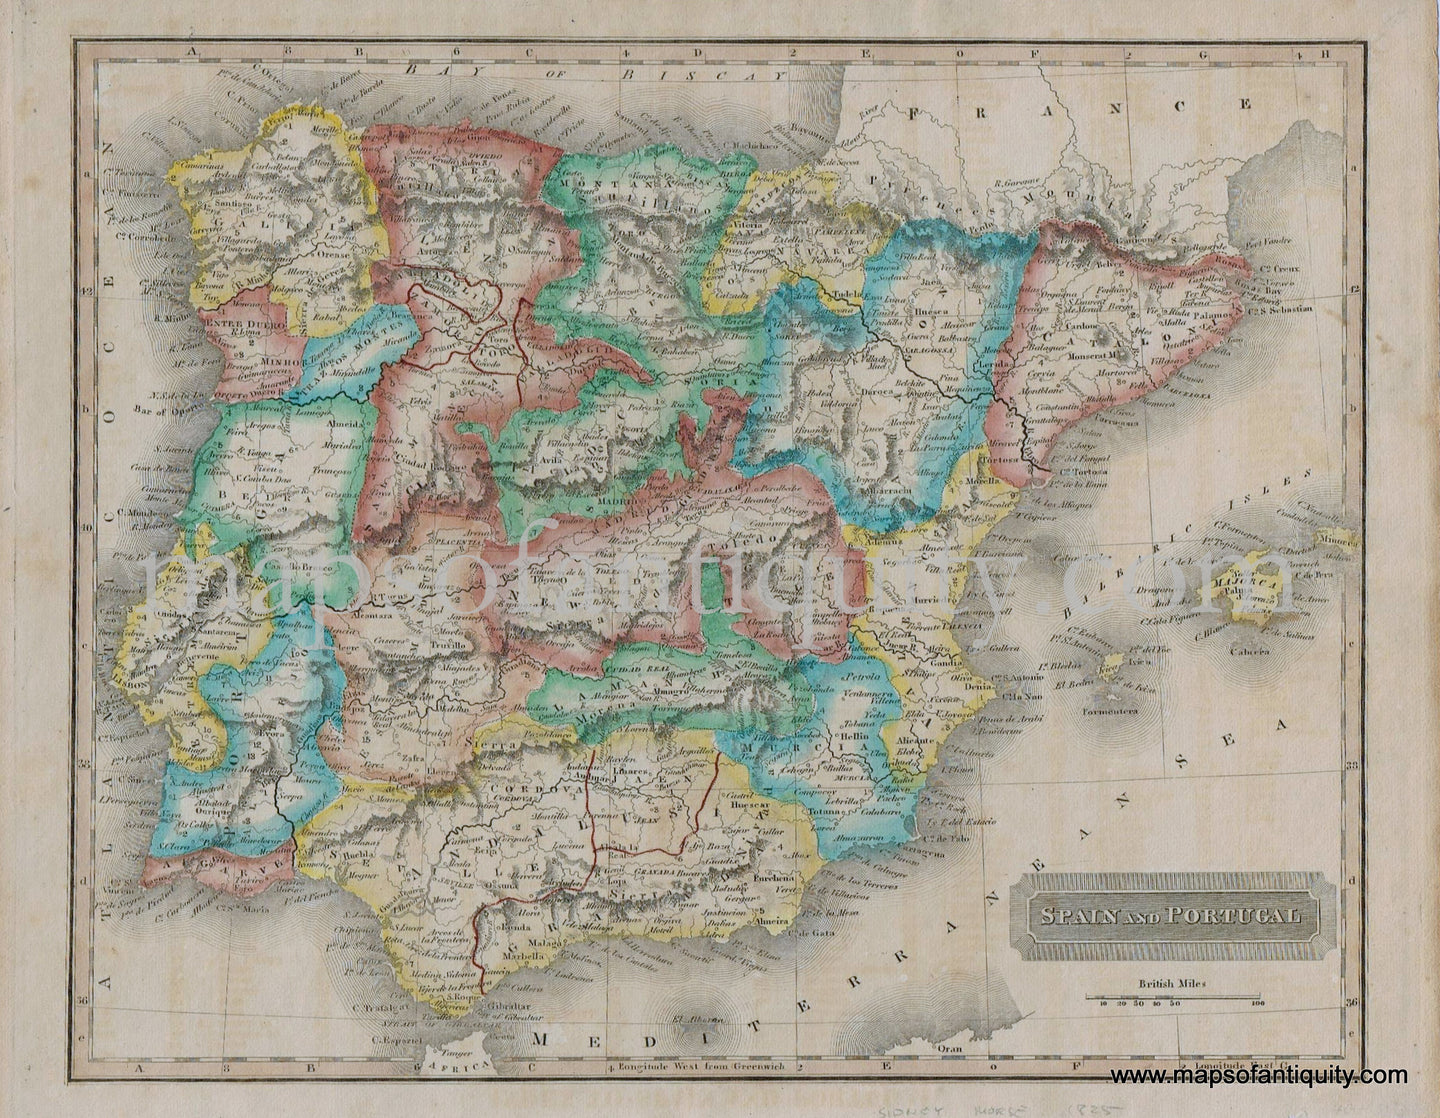 Antique-Hand-Colored-Map-Europe-Spain-and-Portugal-1825-Morse-Spain-&-Portugal-1800s-19th-century-Maps-of-Antiquity